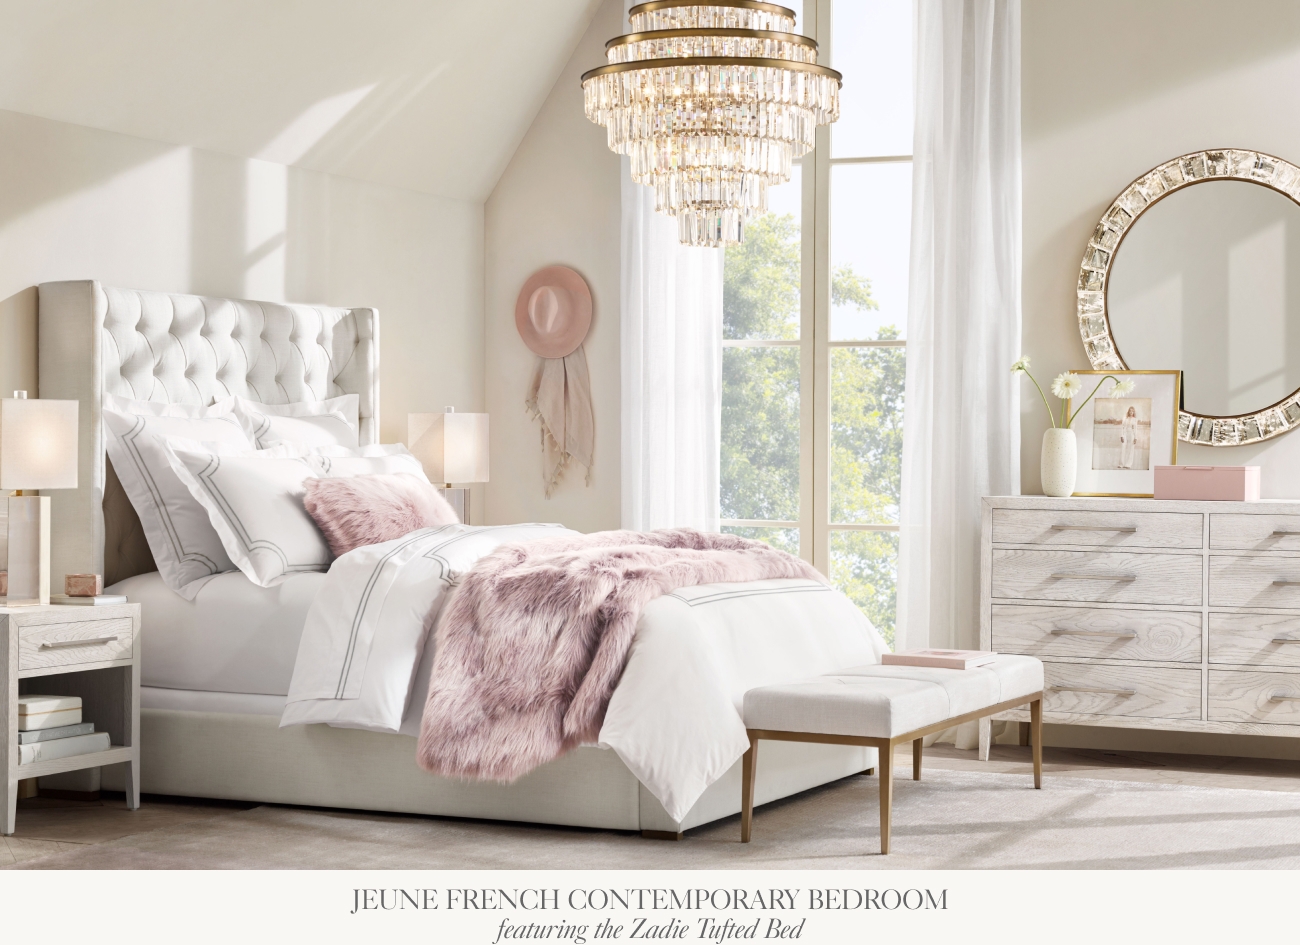  JEUNE FRENCH CONTEMPORARY BEDROOM Jeaturing the Zadie Thfted Bed 